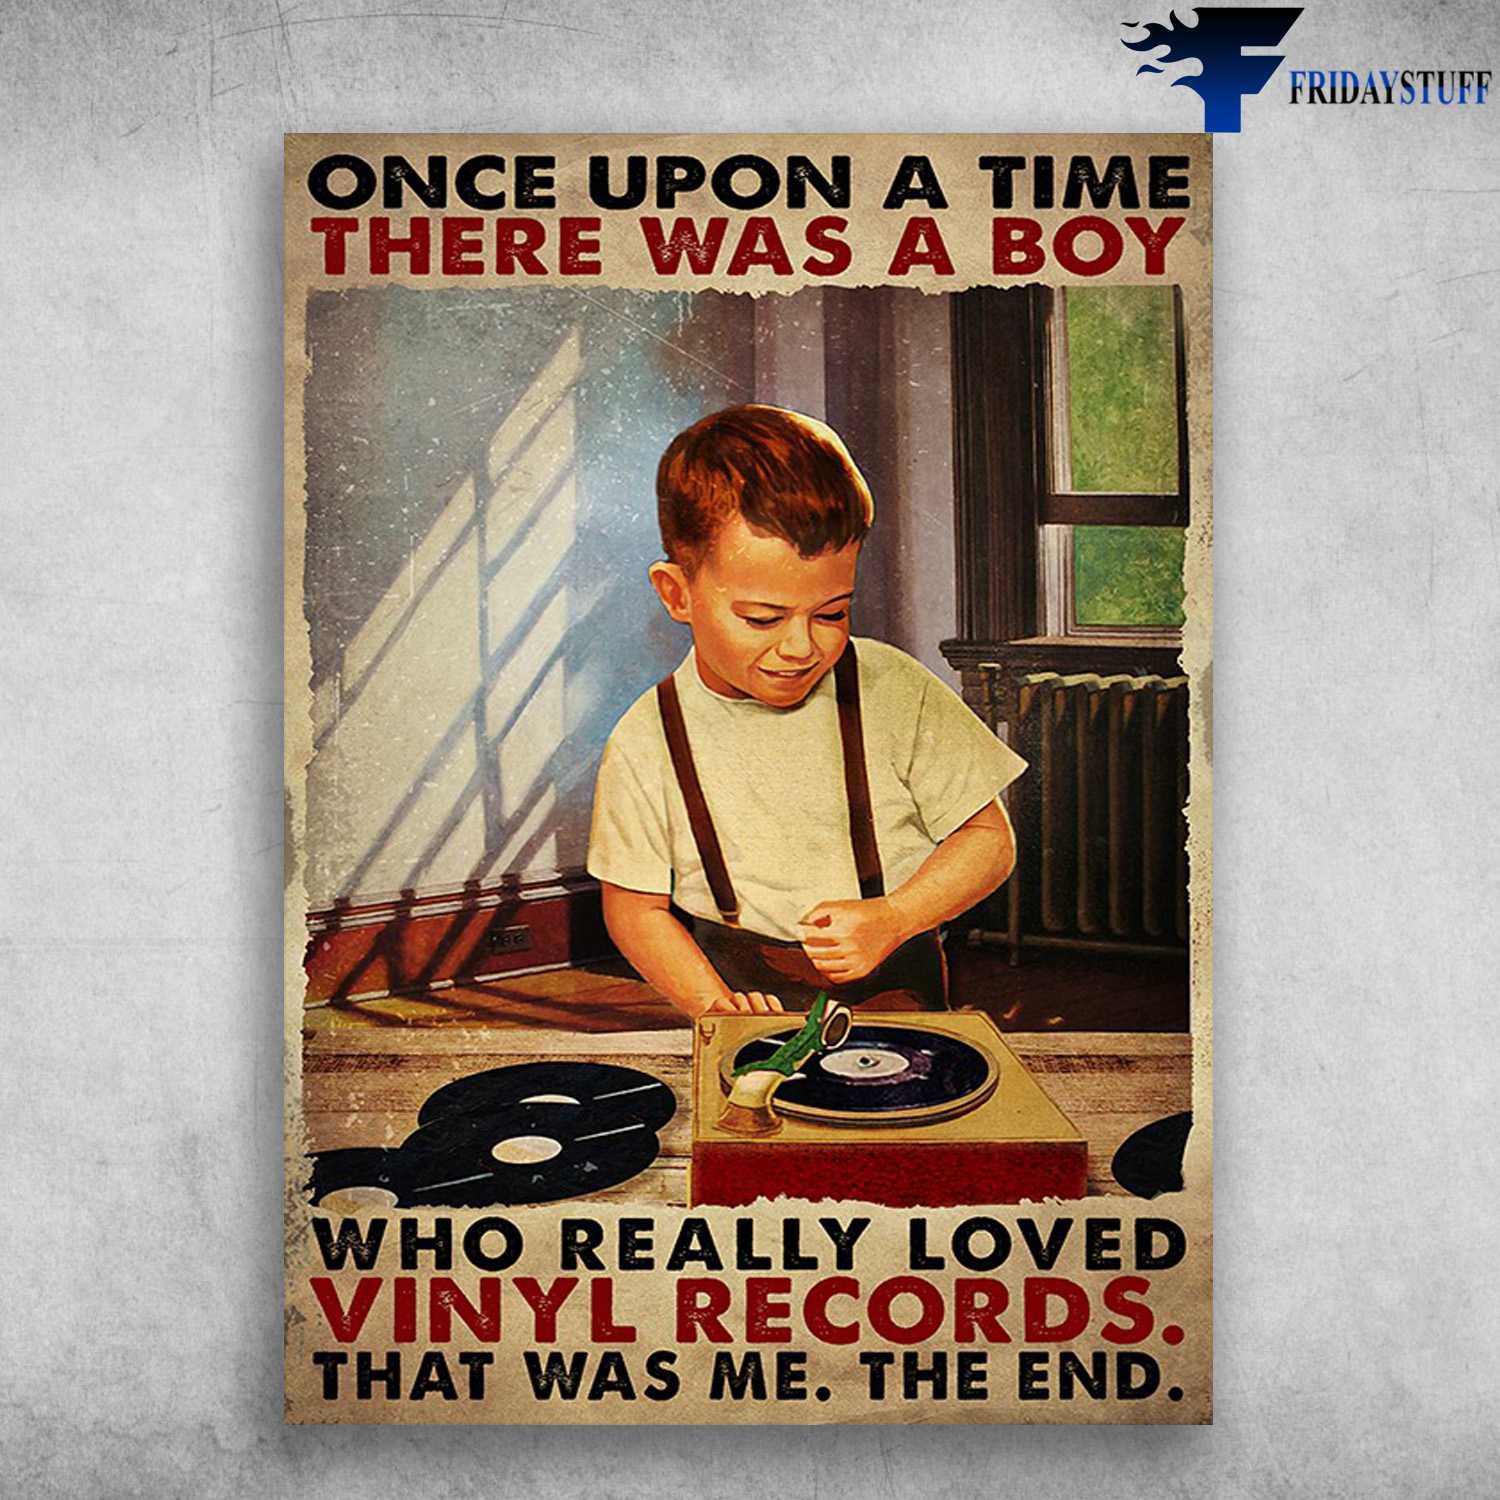 Boy Loves Vinyl Record, Music Lover - Once Upon A Time, There Was A Boy, Who Really Loved Vinyl Records, That Was Me, The End